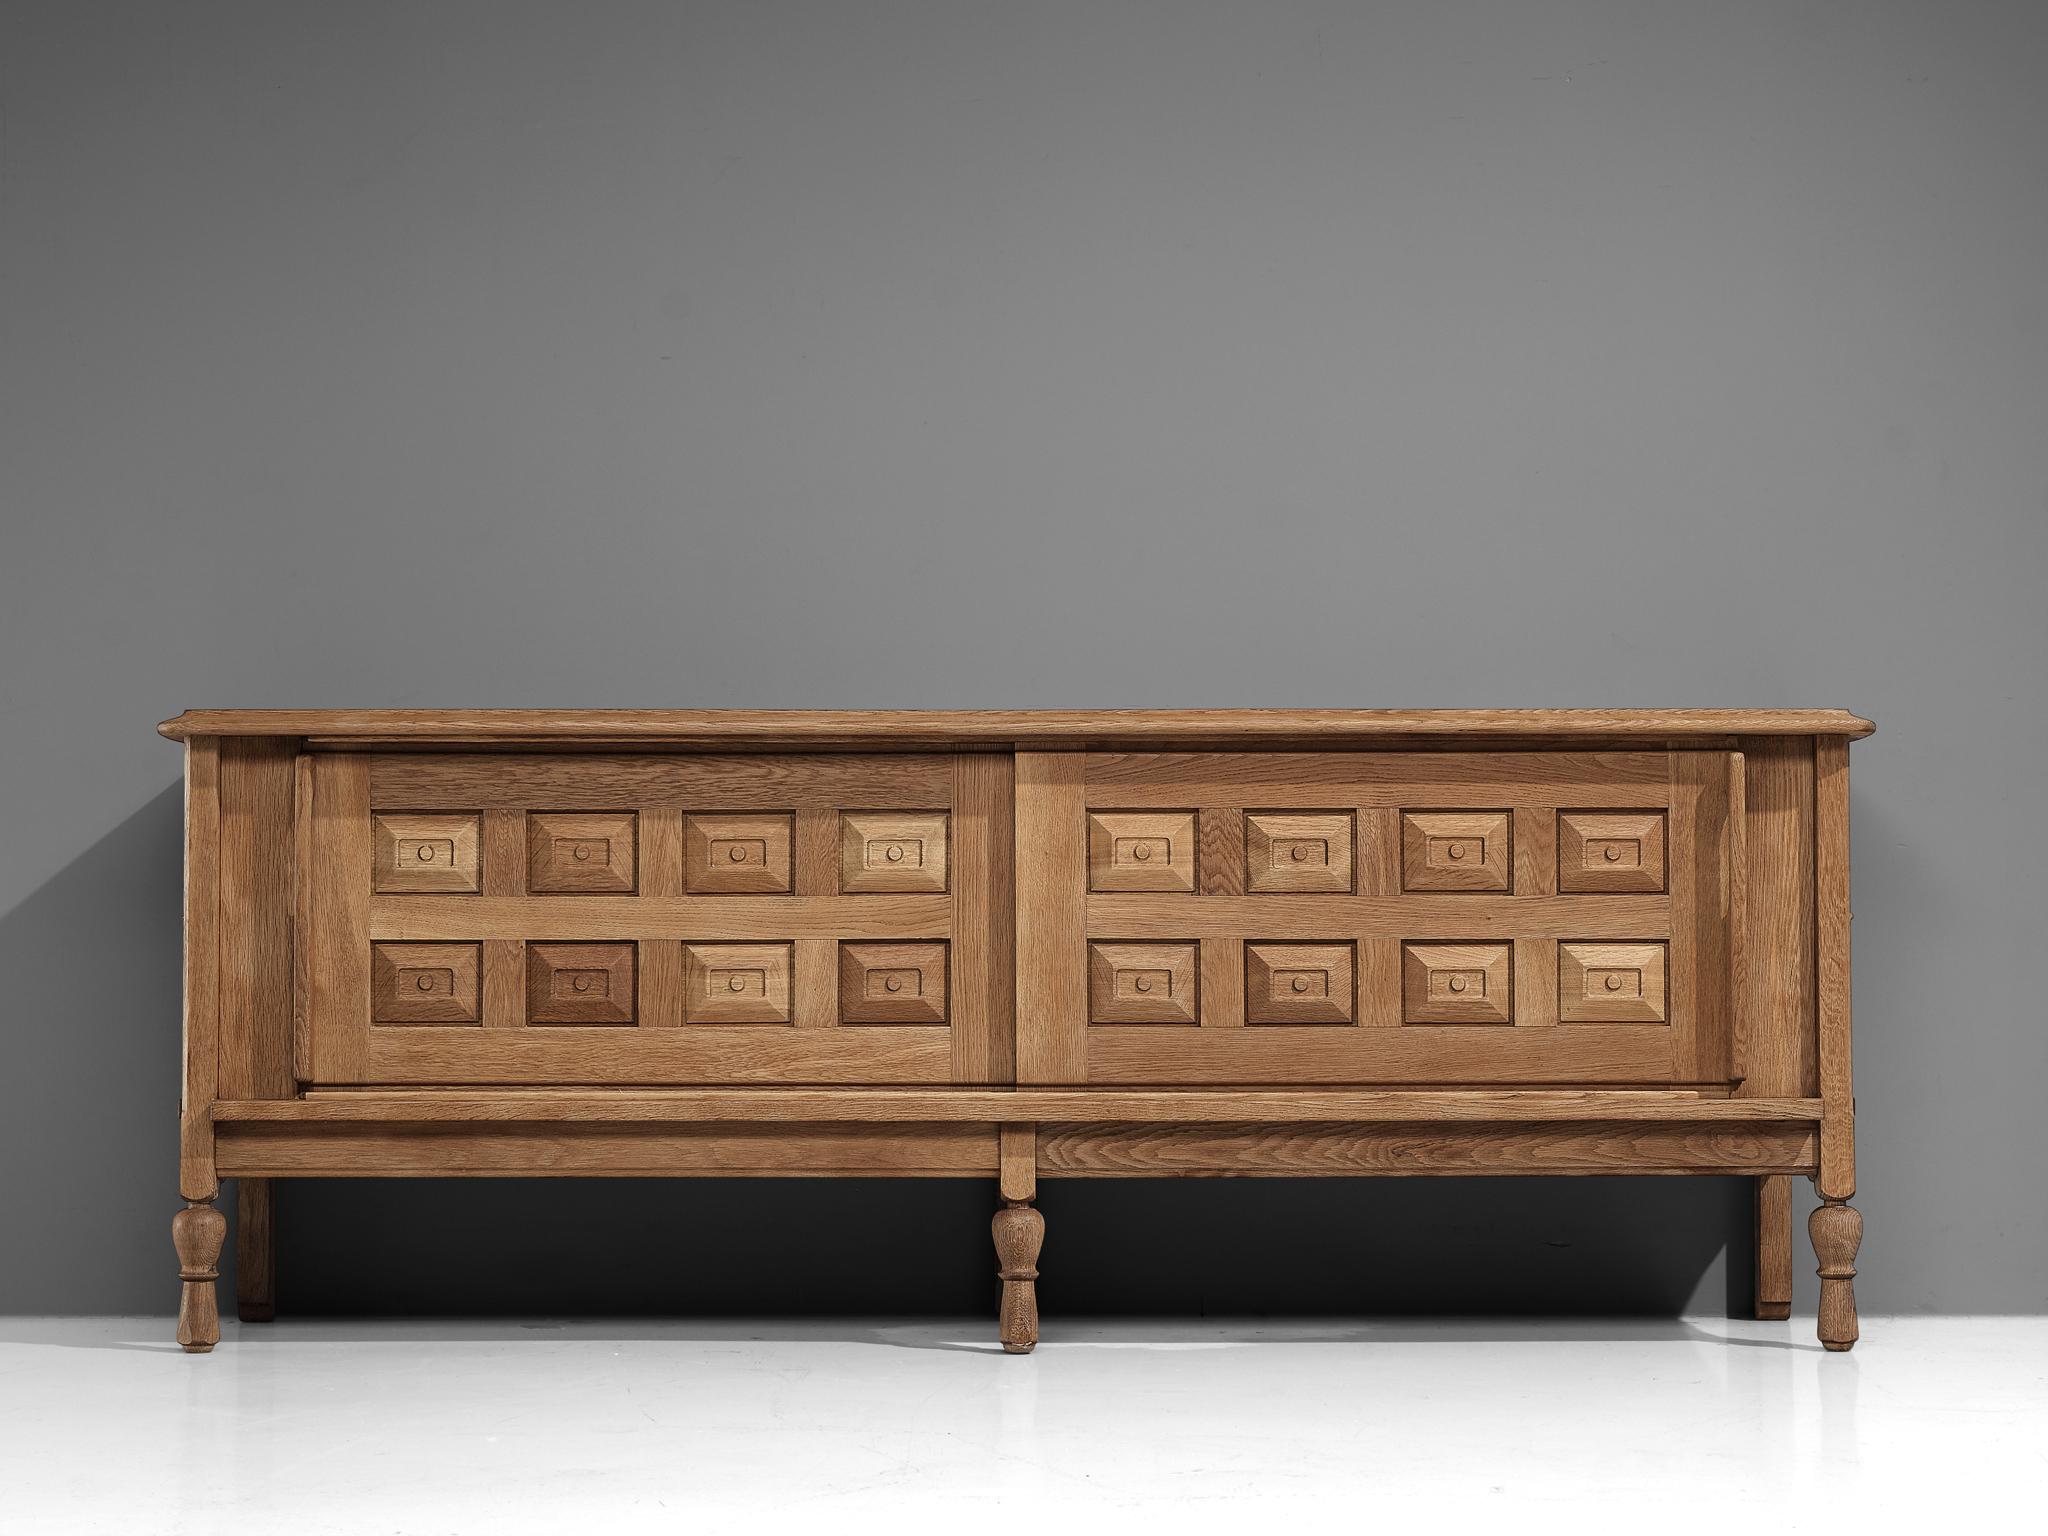 Guillerme et Chambron for Votre Maison, credenza, in oak, brass, France, 1960s.

Characteristic sideboard in solid oak. This cabinet holds all the characteristics of the French designer duo Jacques Chambron and Robert Guillerme. As many of the